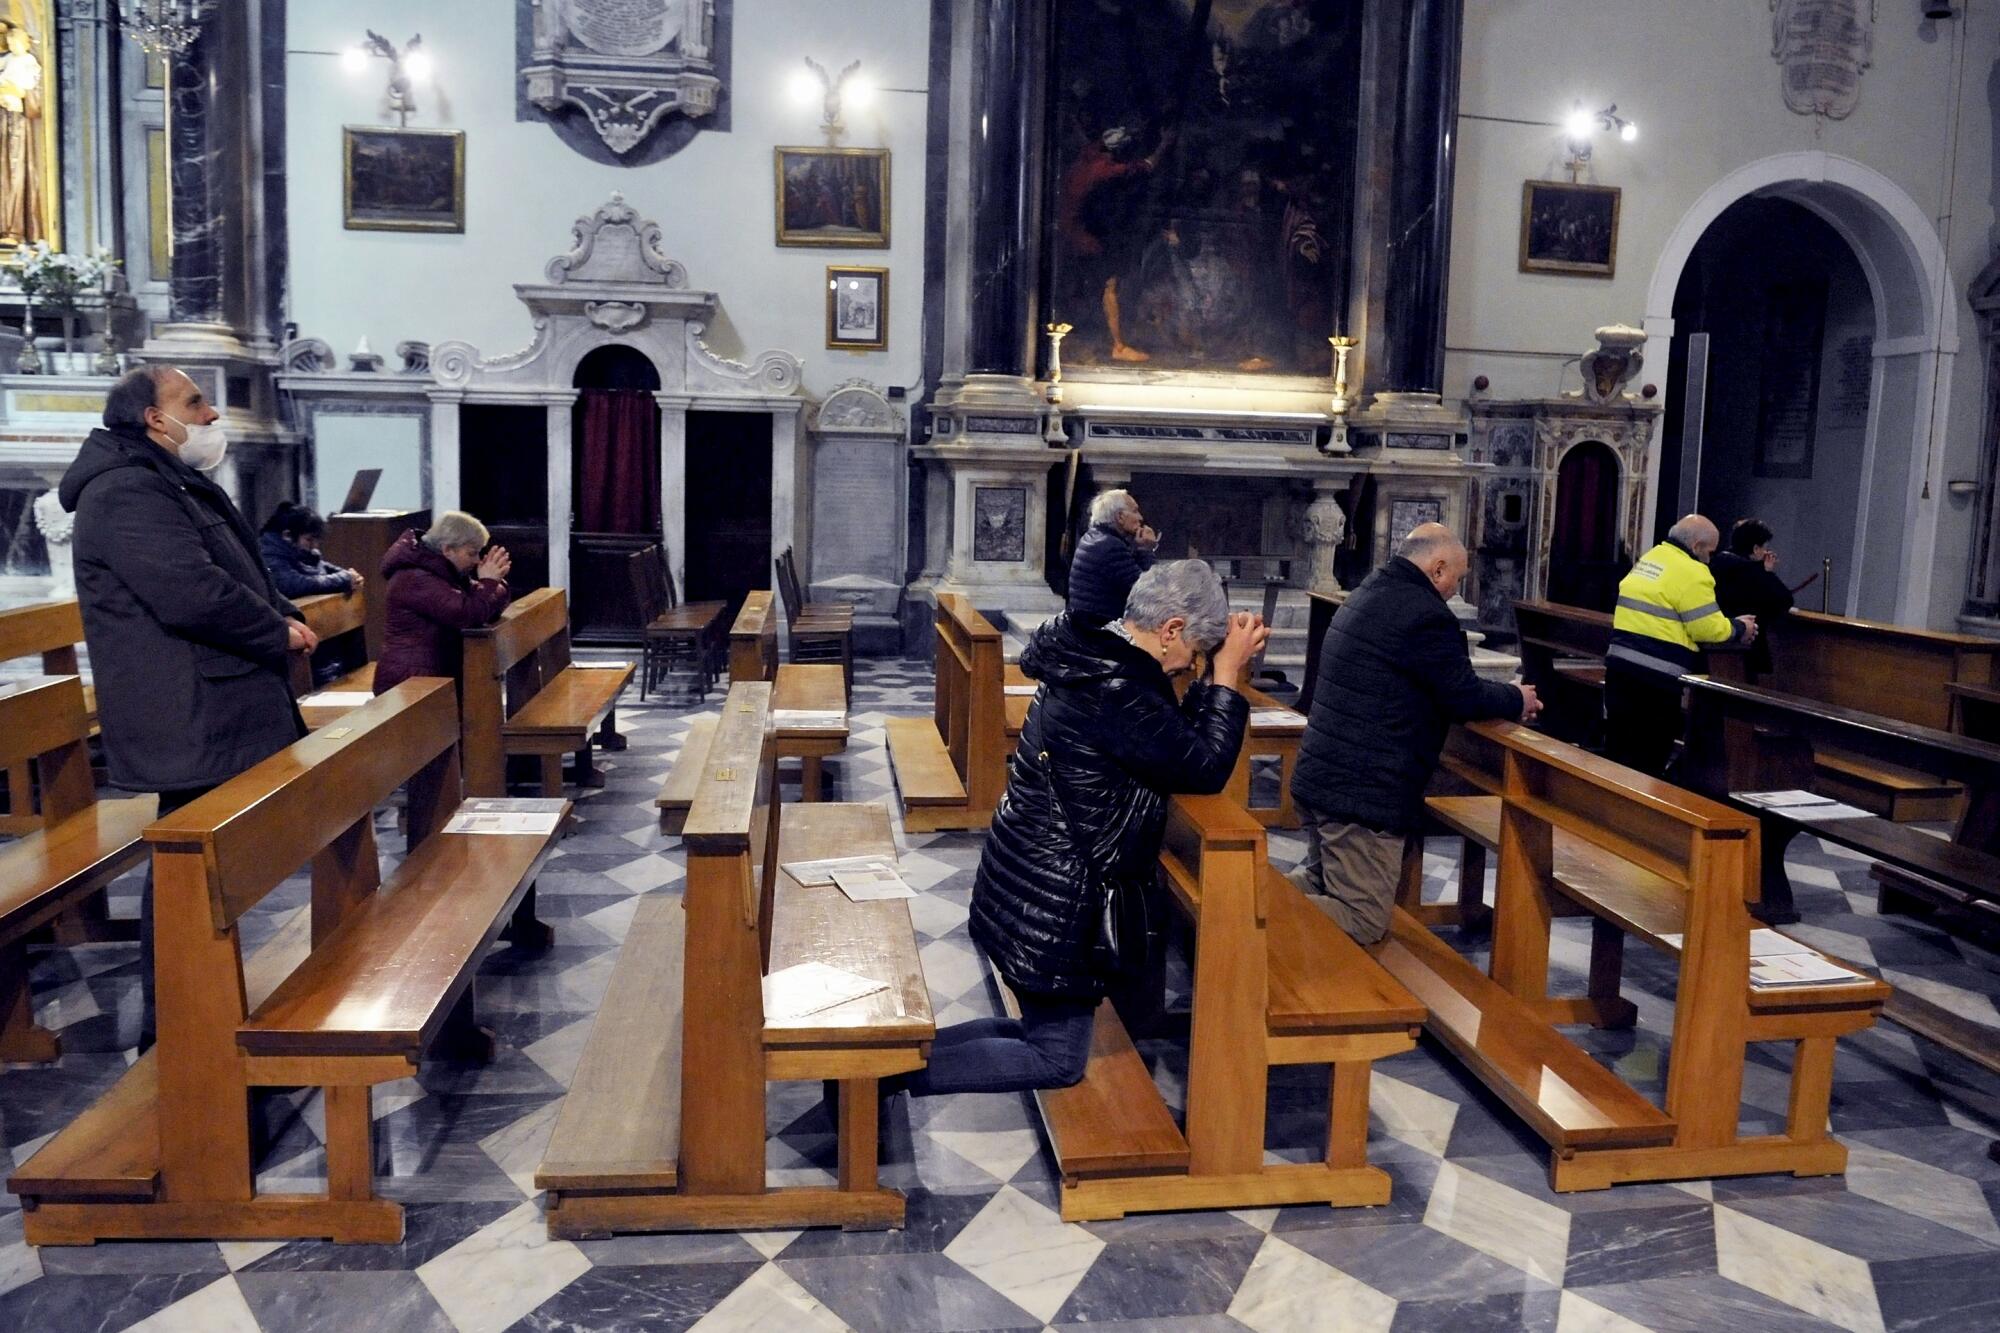 People observe social distancing during Sunday Mass in the ancient Church of the Madonna in Livorno, Italy.